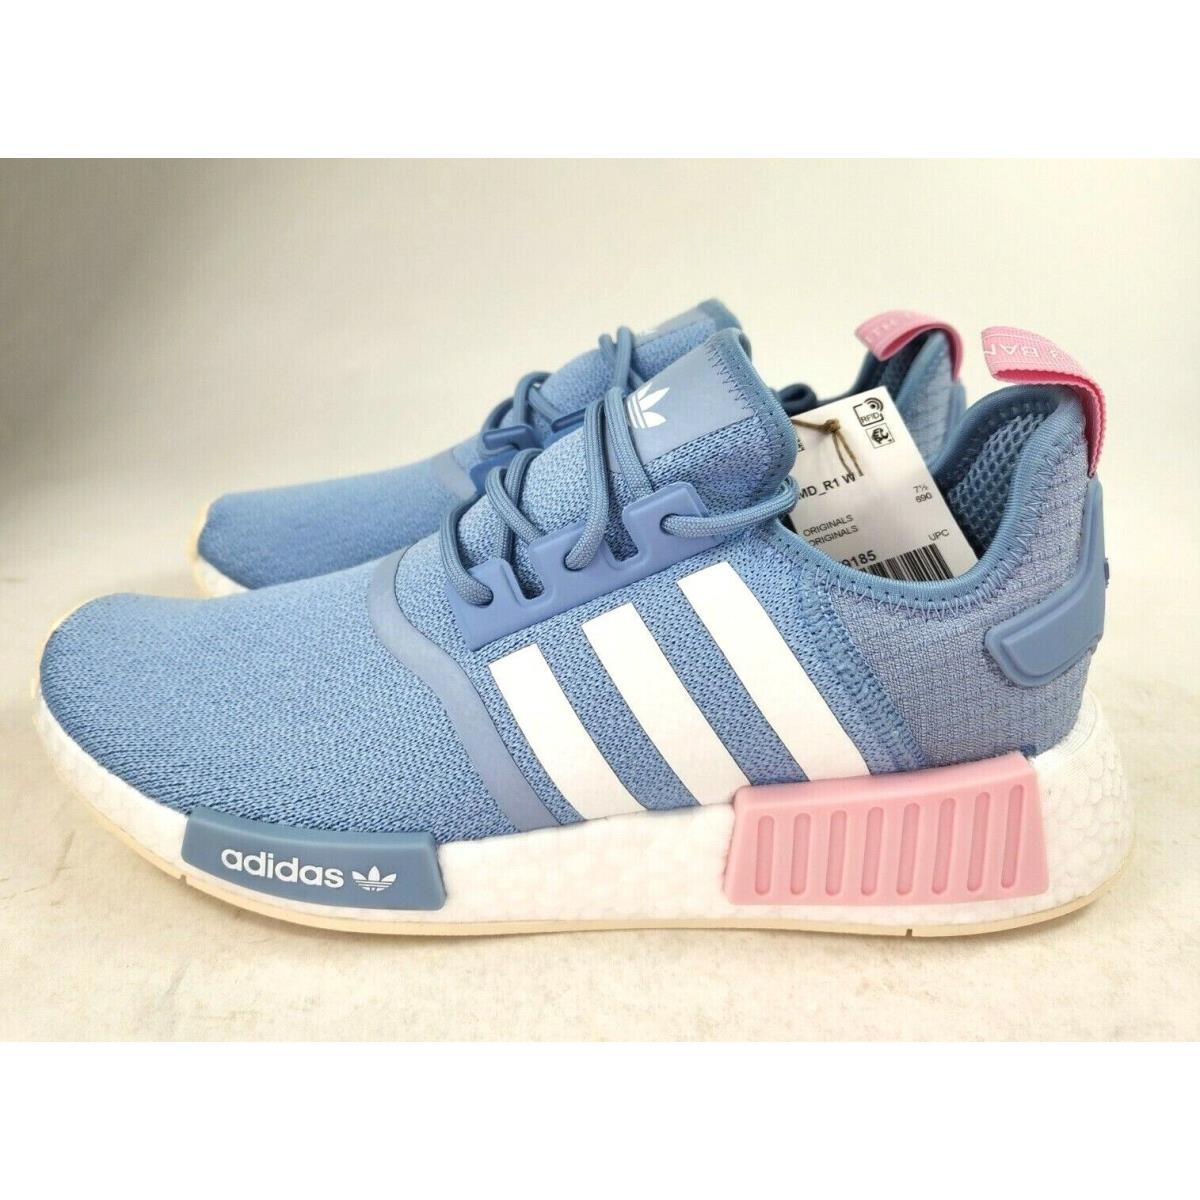 lotería justa Charlotte Bronte Adidas Nmd R1 Boost Sky Blue Pink White Sail Shoes Women`s Sizes GV9185 |  692740687841 - Adidas shoes NMD - Blue | SporTipTop